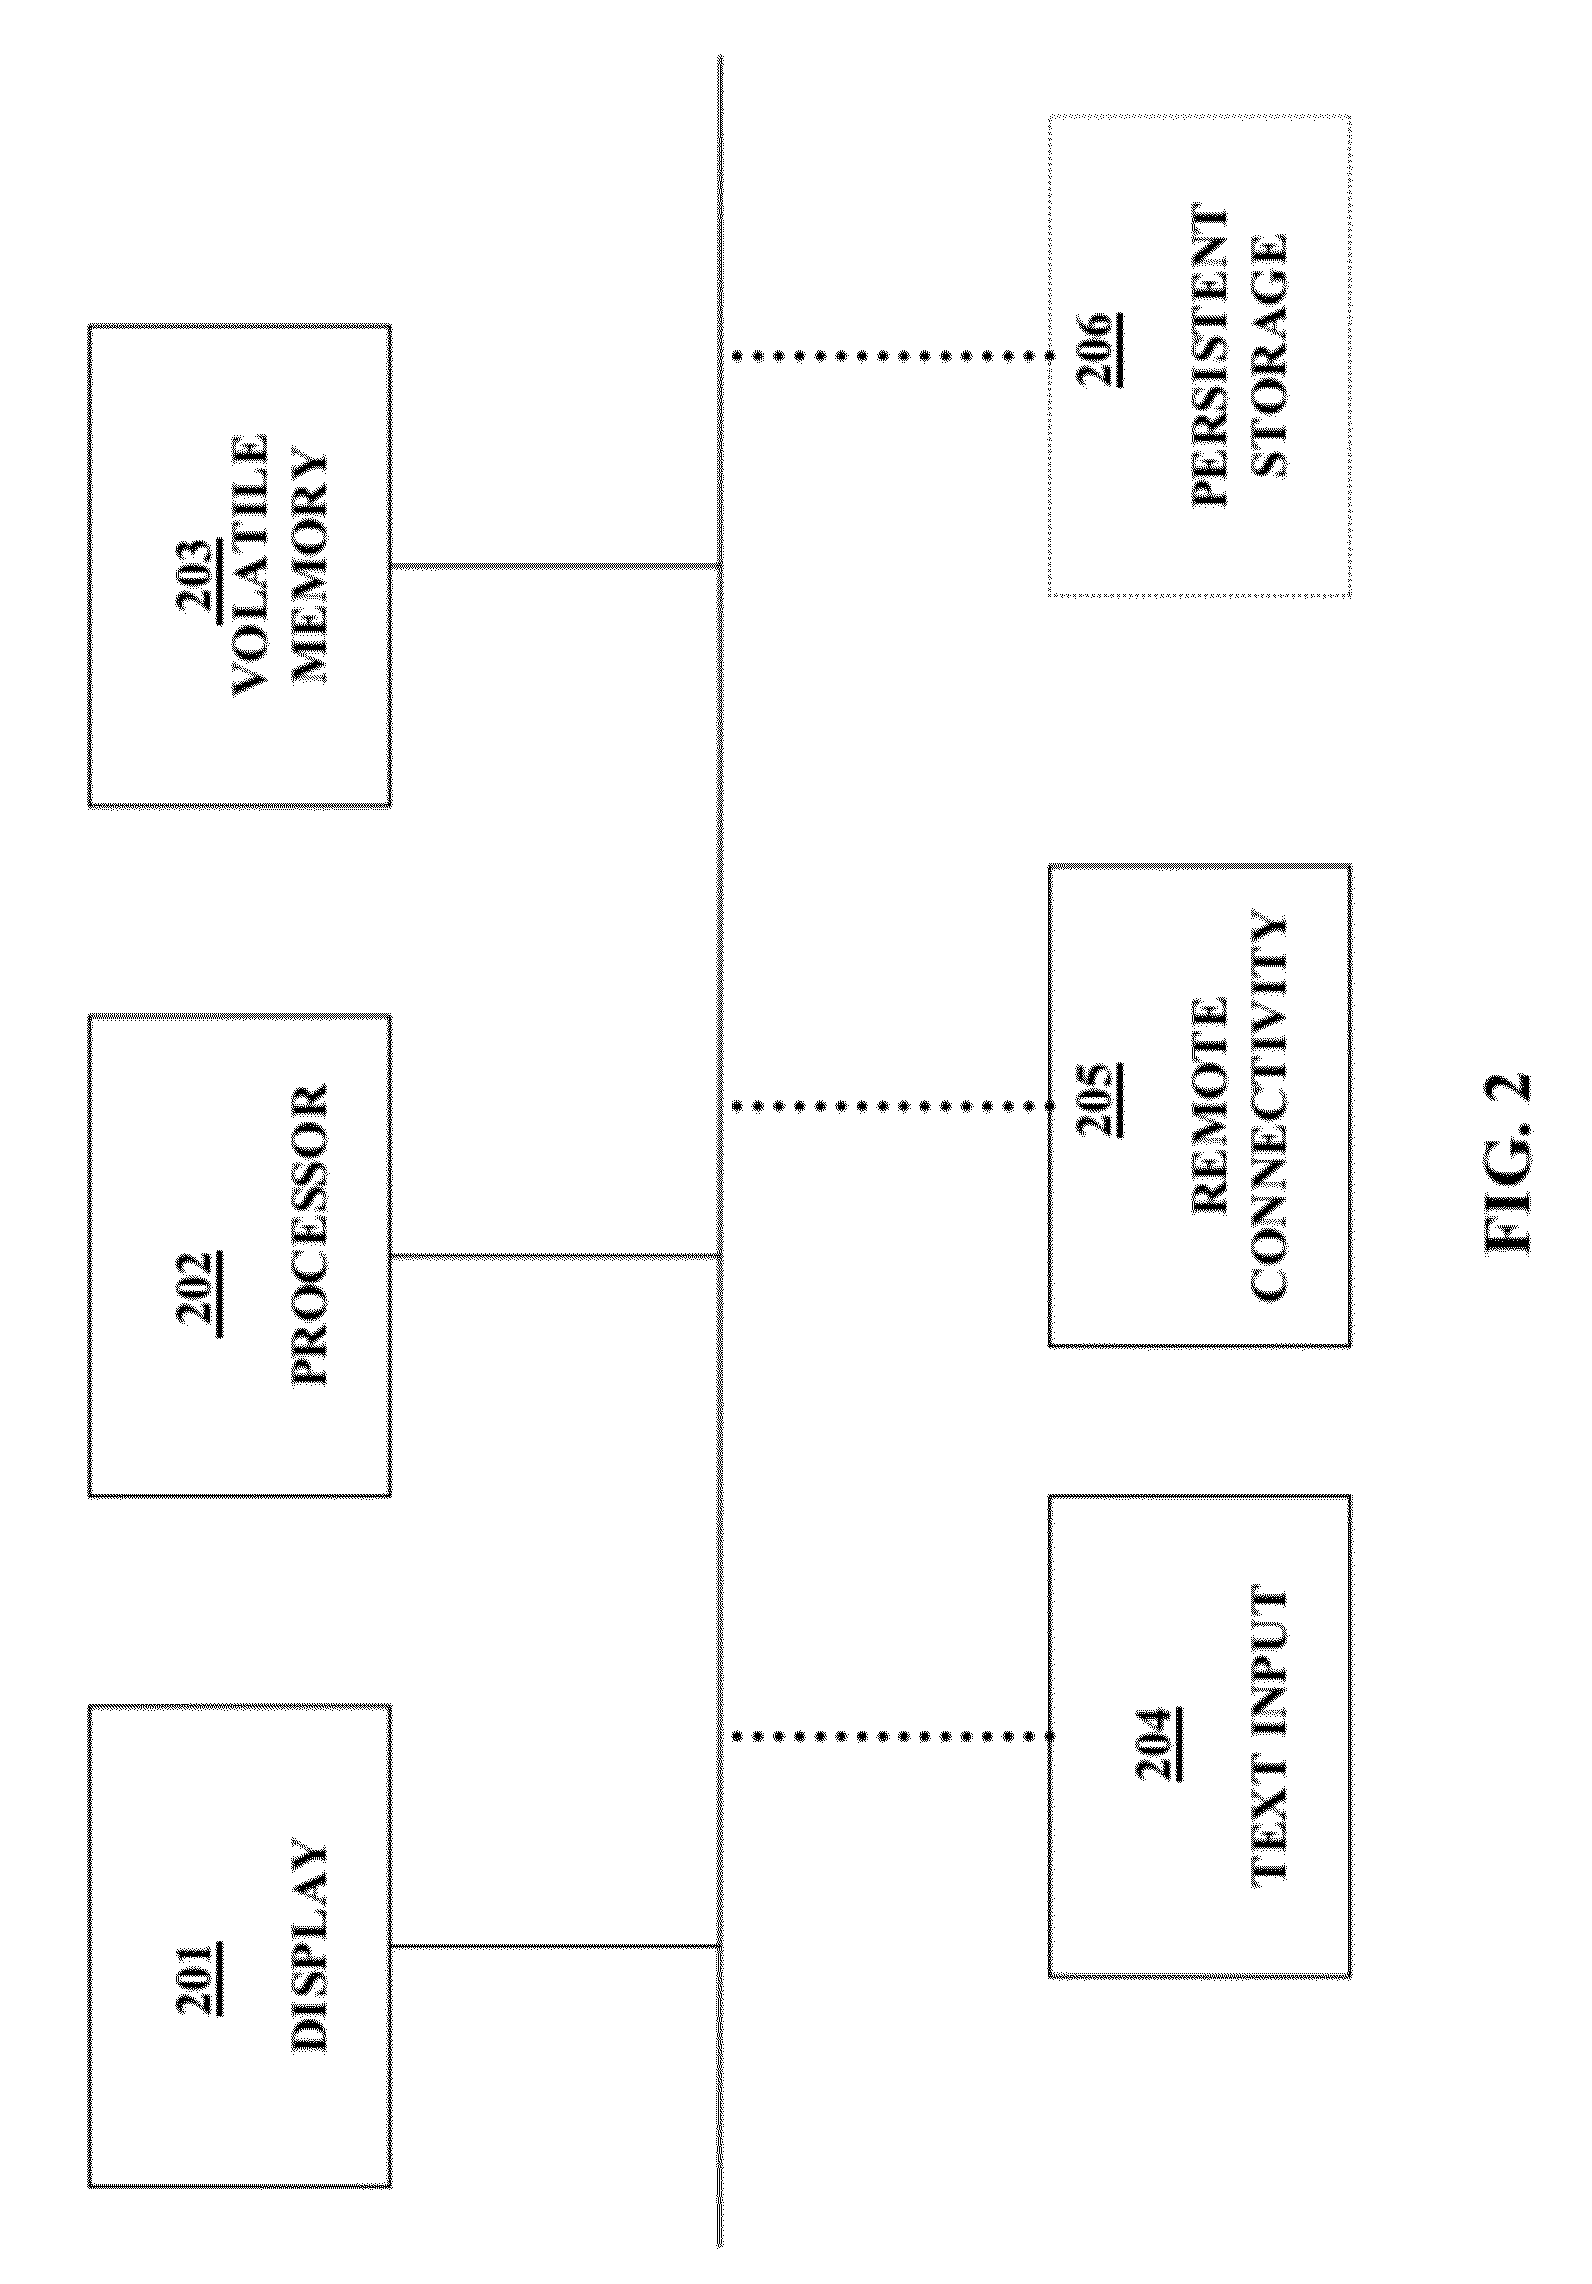 Method and System for Incremental Search with Reduced Text Entry Where the Relevance of Results is a Dynamically Computed Function of User Input Search String Character Count